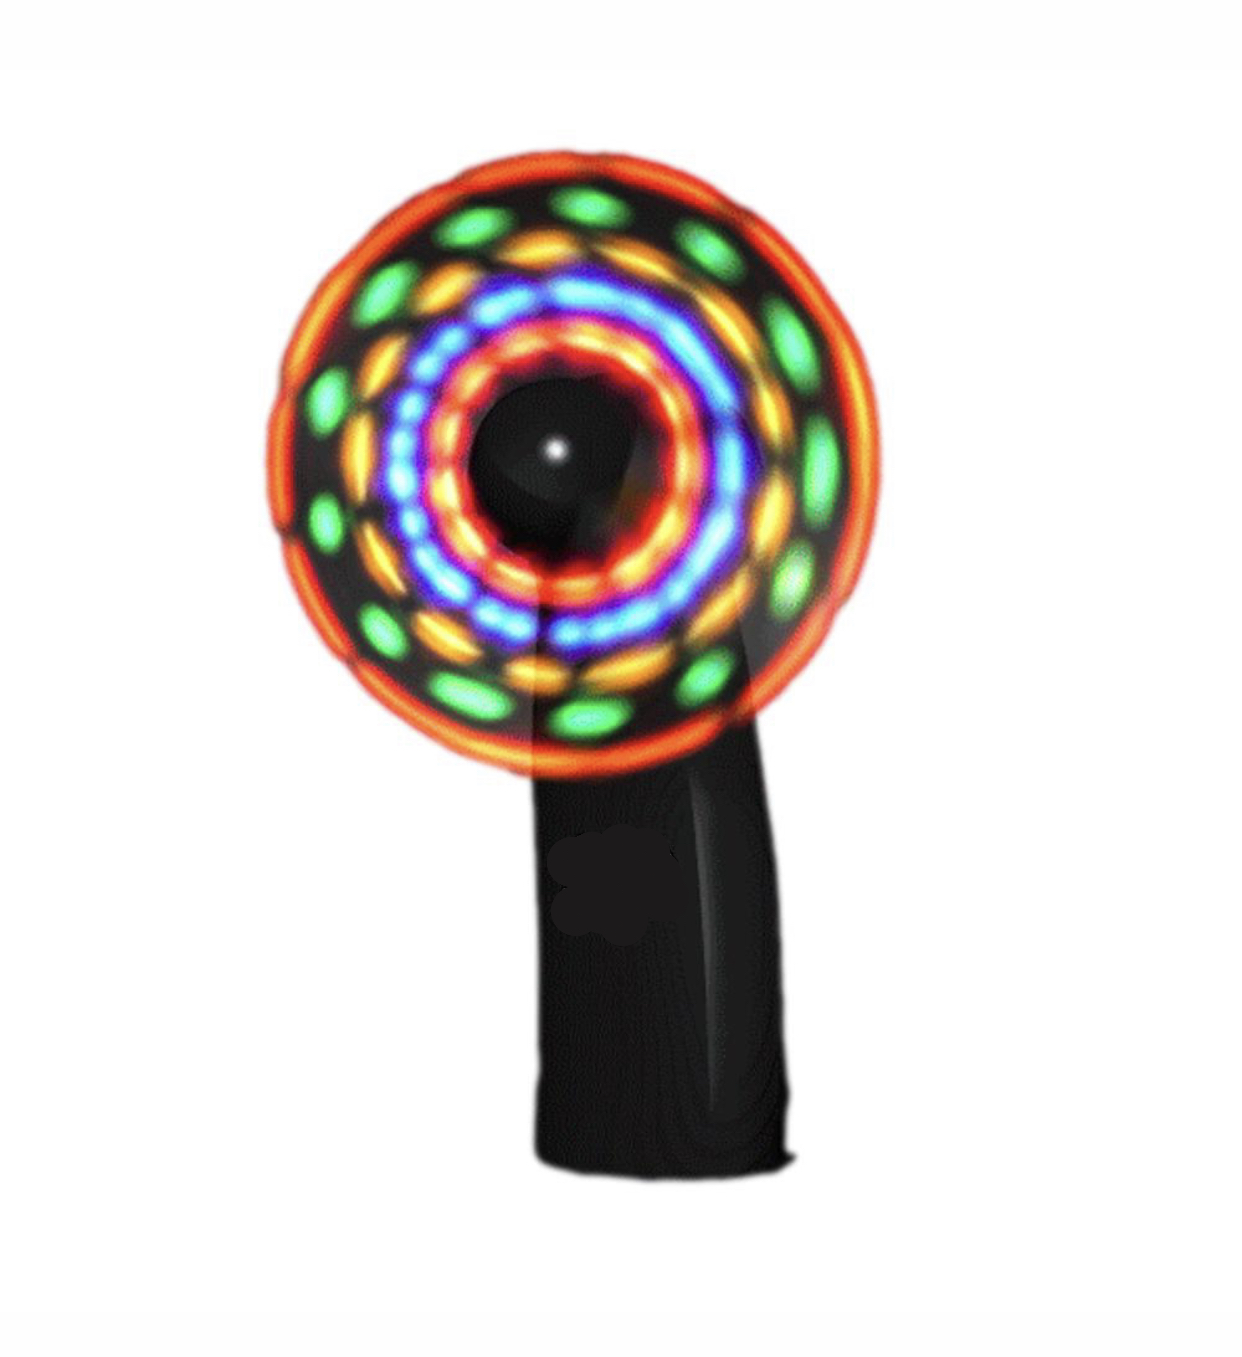 Portable Light Up Mini Cooling Fan with Black Handle Battery Operated for Hot Weather 4th of July